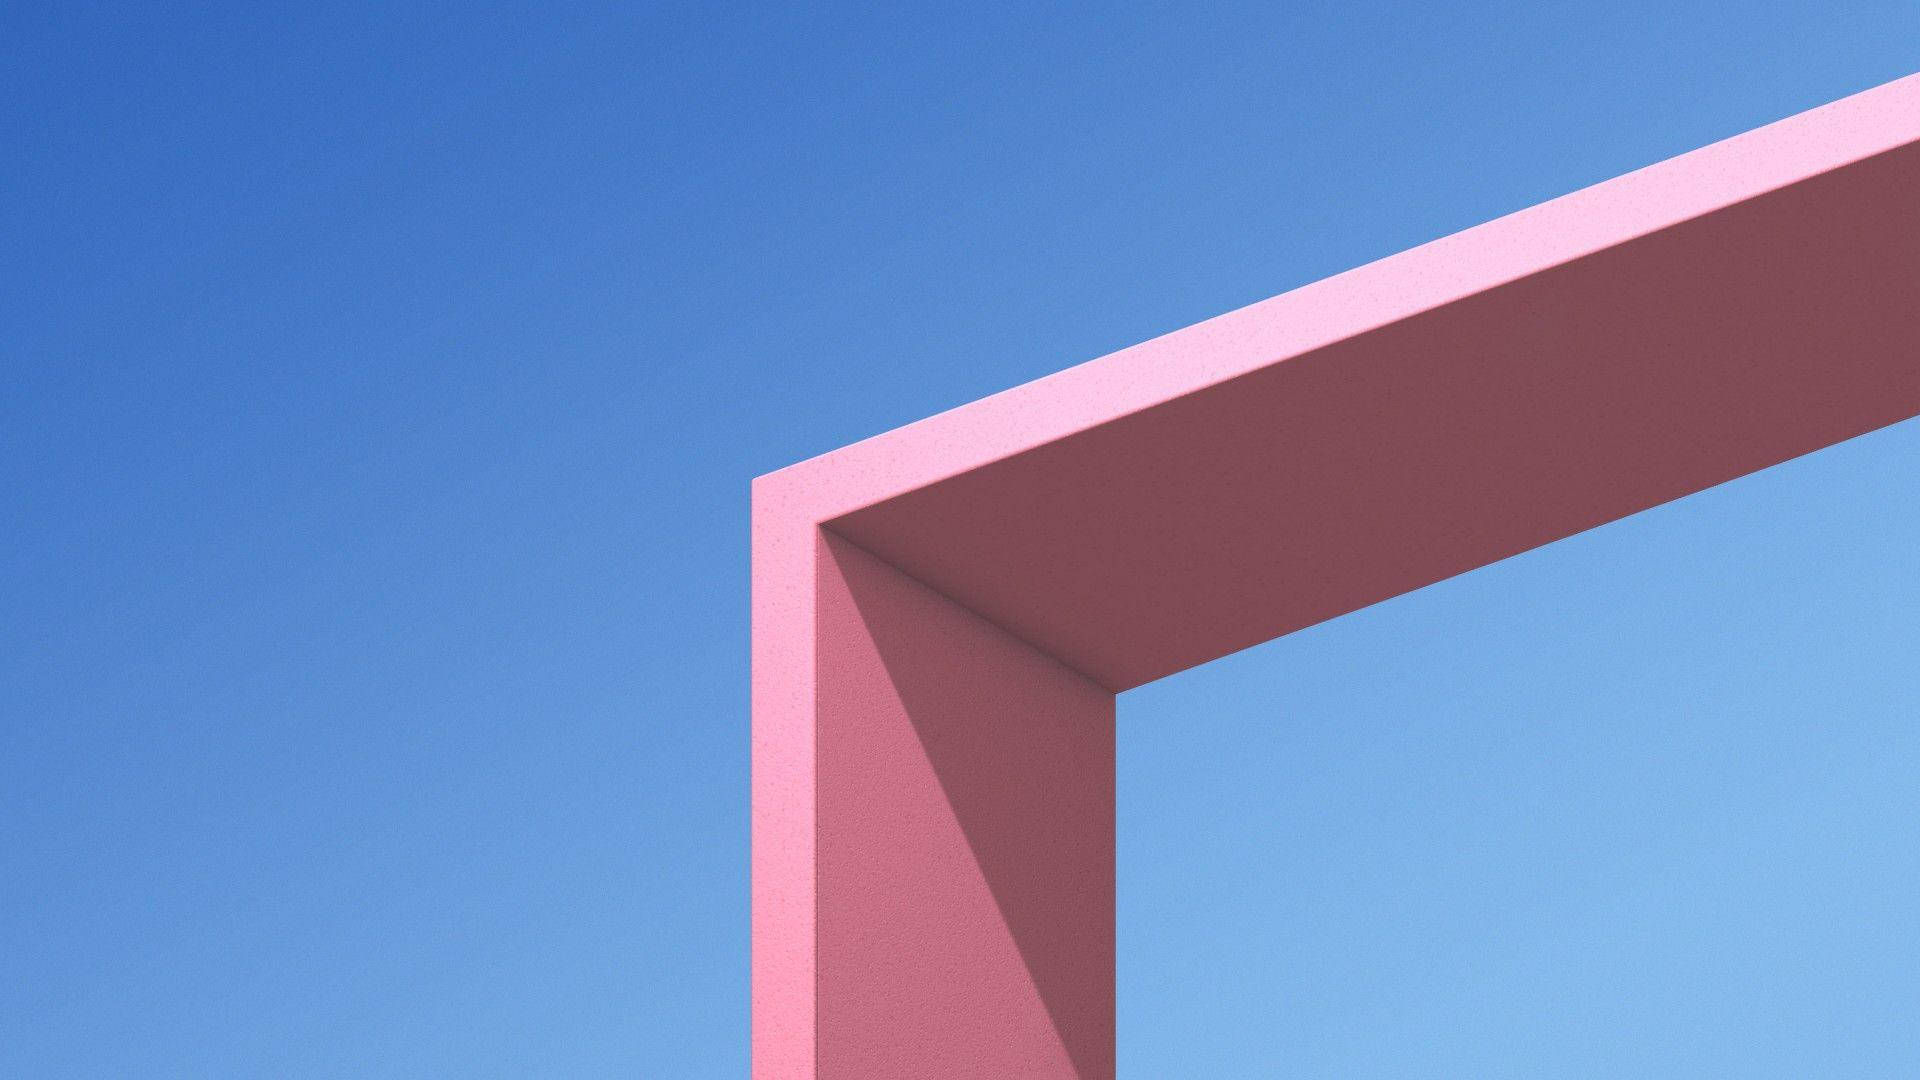 Pink Architecture On Blue Sky